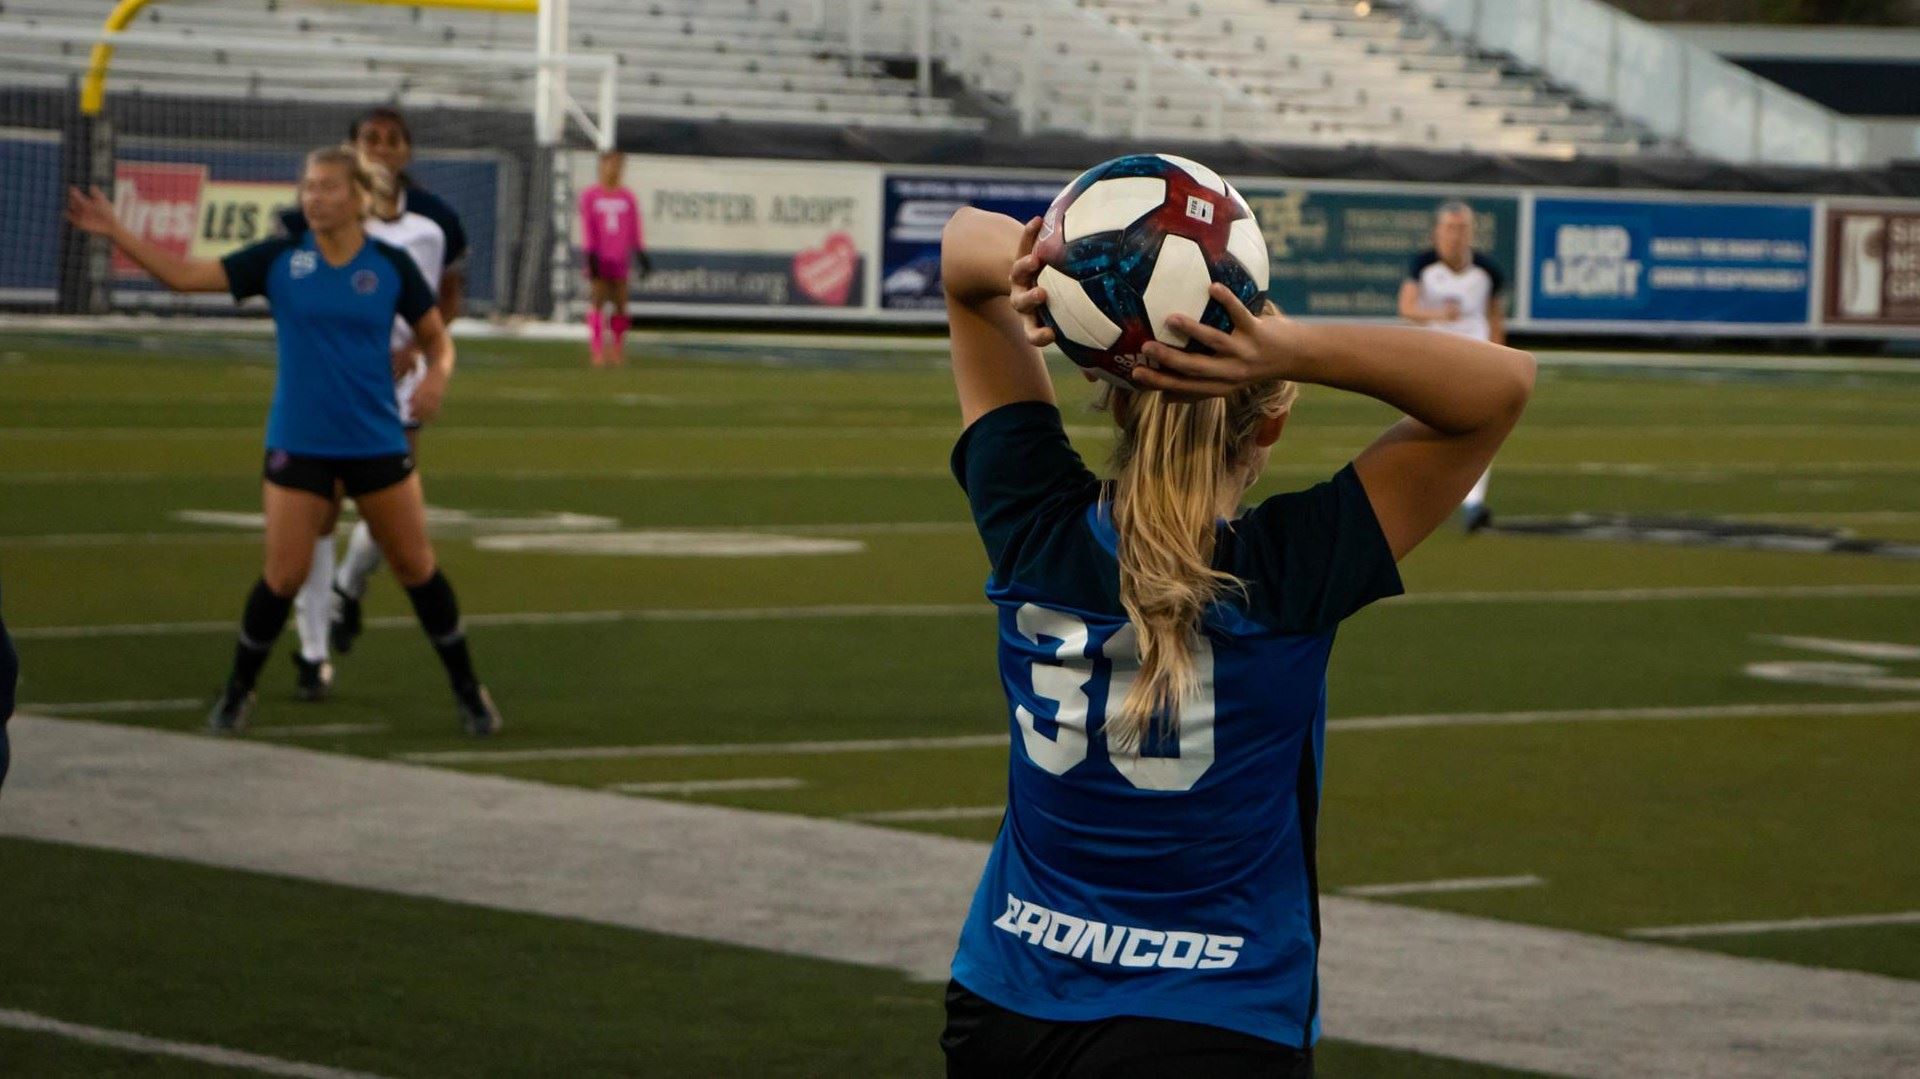 player throwing a soccer ball onto the field